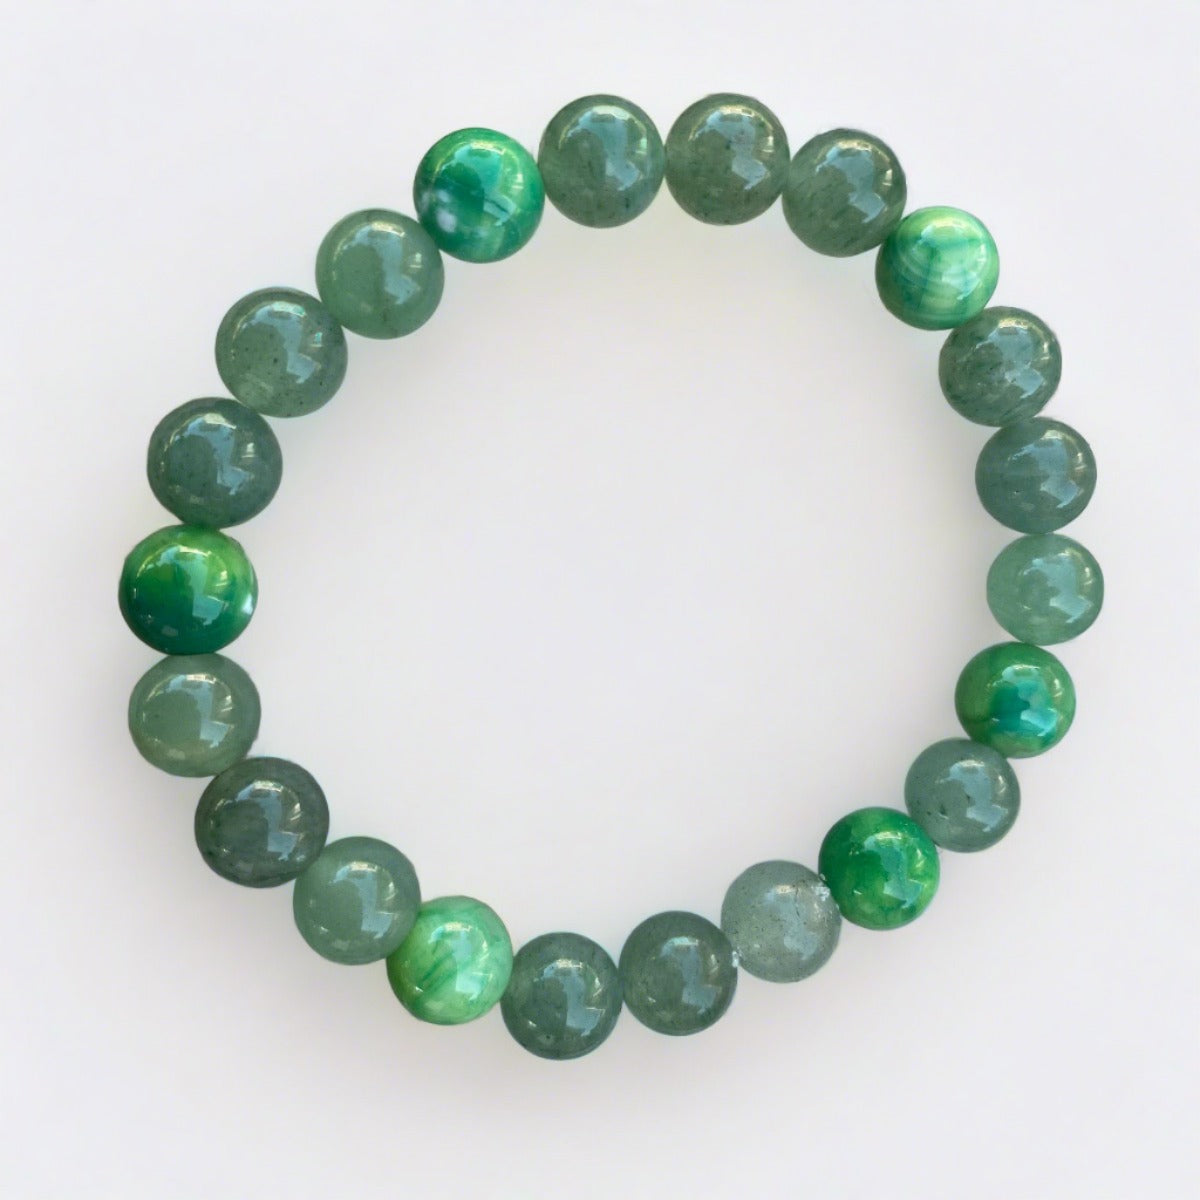 Green agate and aventurine stretch cord bracelet displayed on a natural rock background.